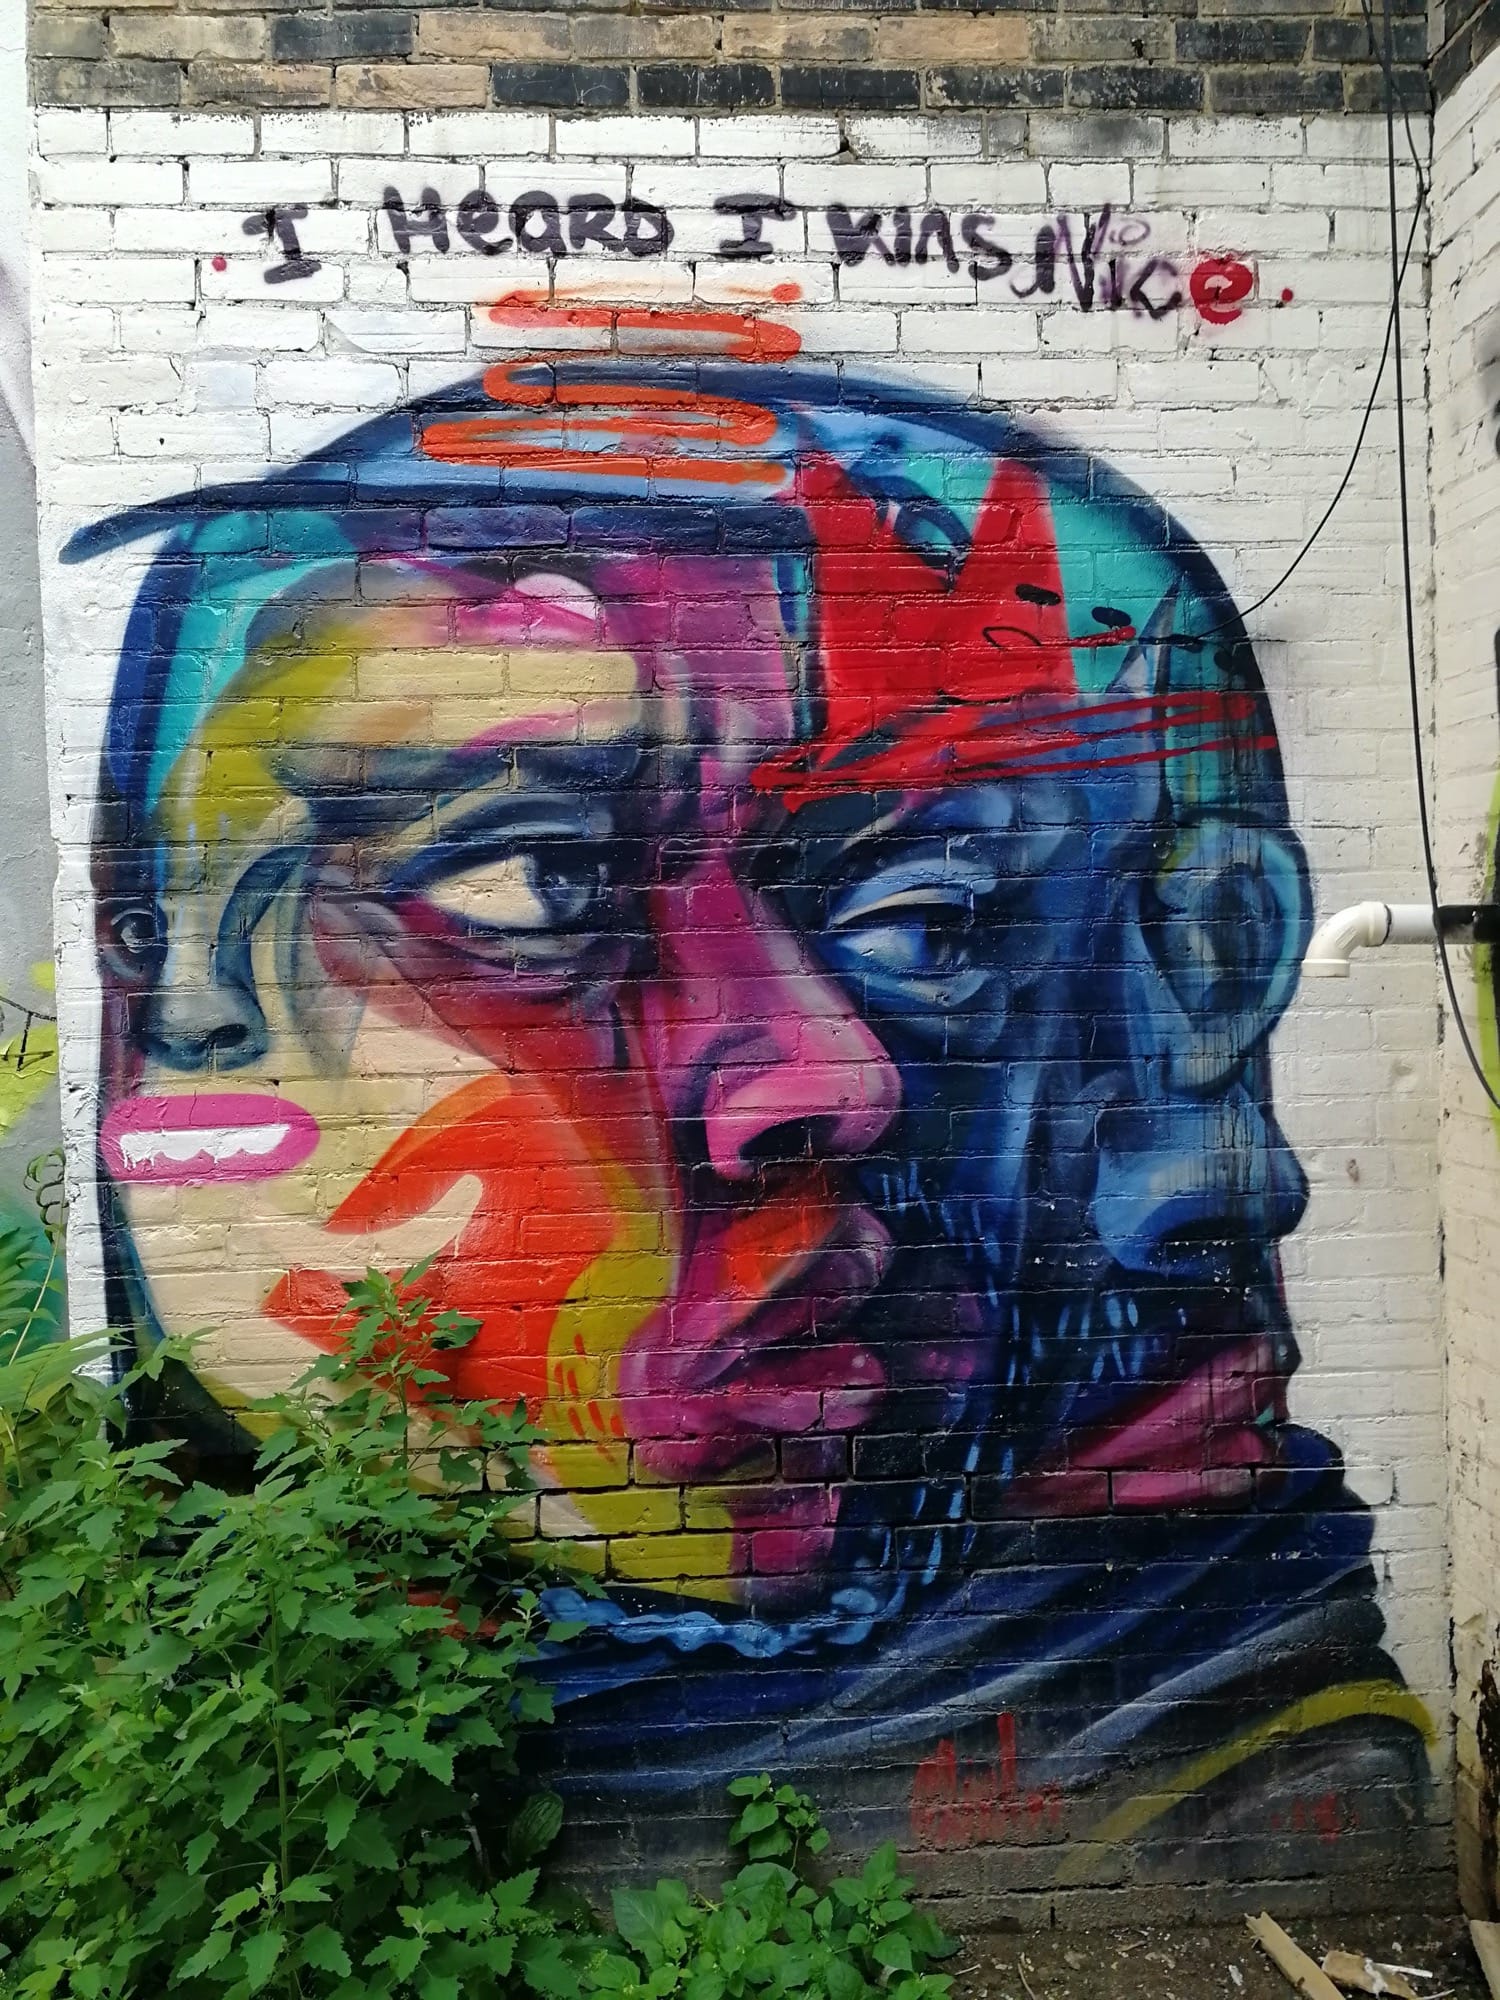 Graffiti 2480  captured by Rabot in Toronto Canada